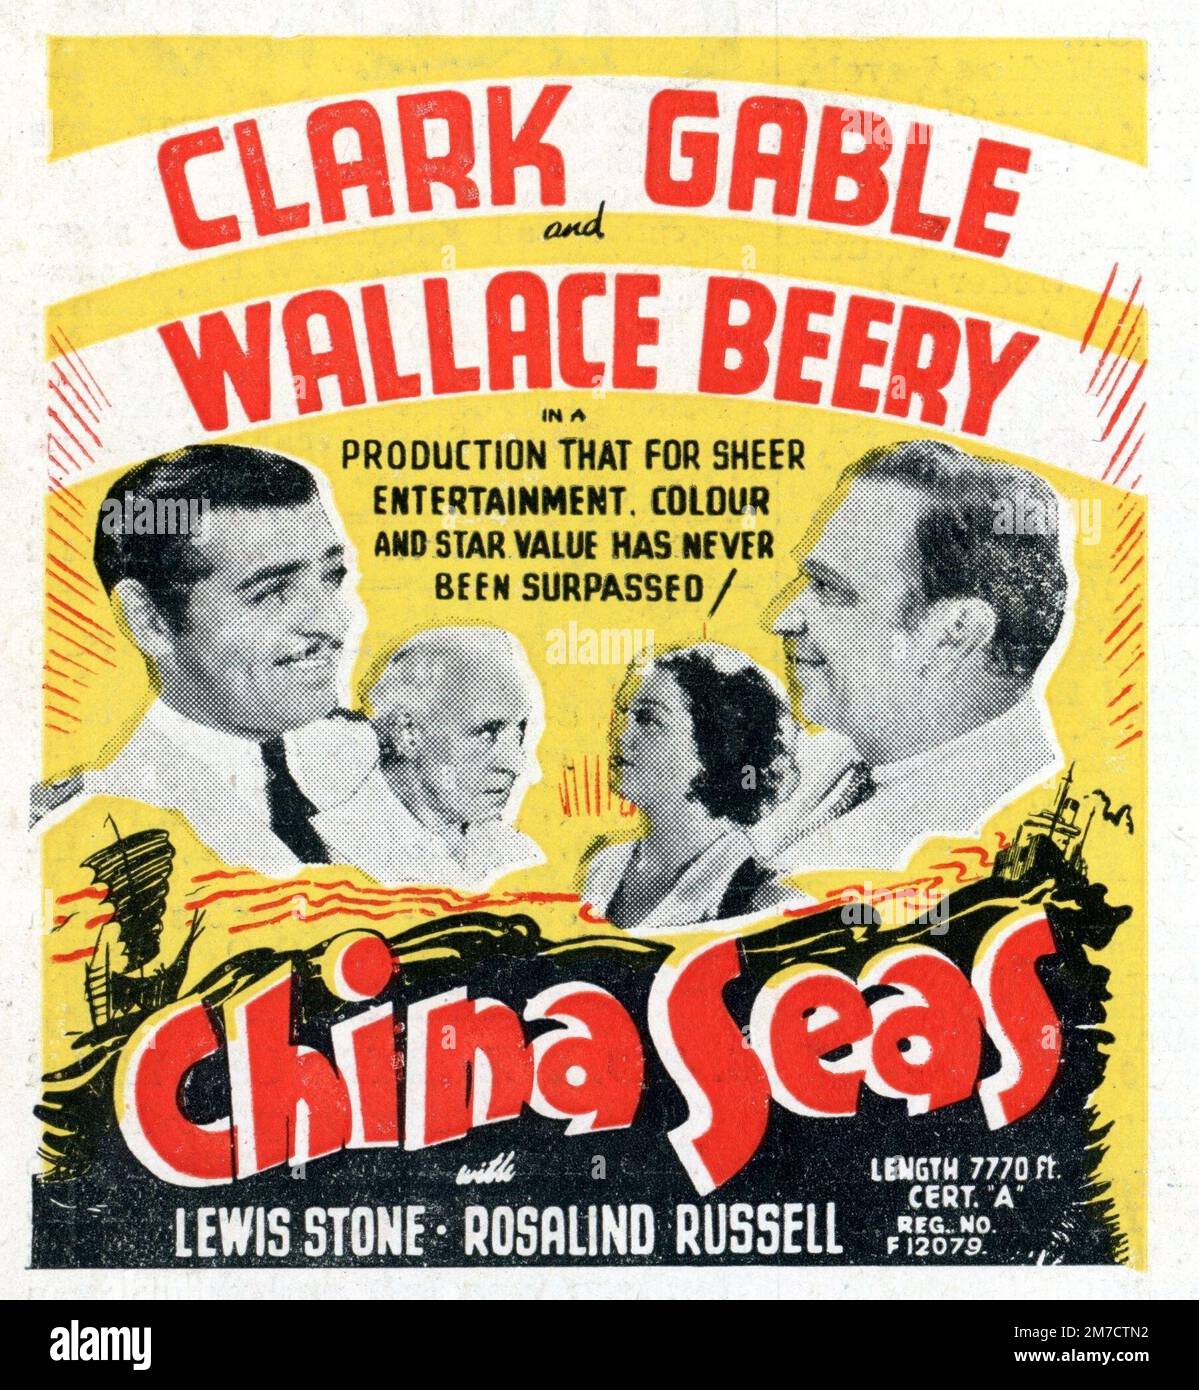 British Trade Ad for 1942 re-issue of CLARK GABLE WALLACE BEERY LEWIS STONE and ROSALIND RUSSELL in CHINA SEAS 1935 director TAY GARNETT Metro Goldwyn Mayer distributed by Associated British Film Distributors (A.B.F.D.) Stock Photo